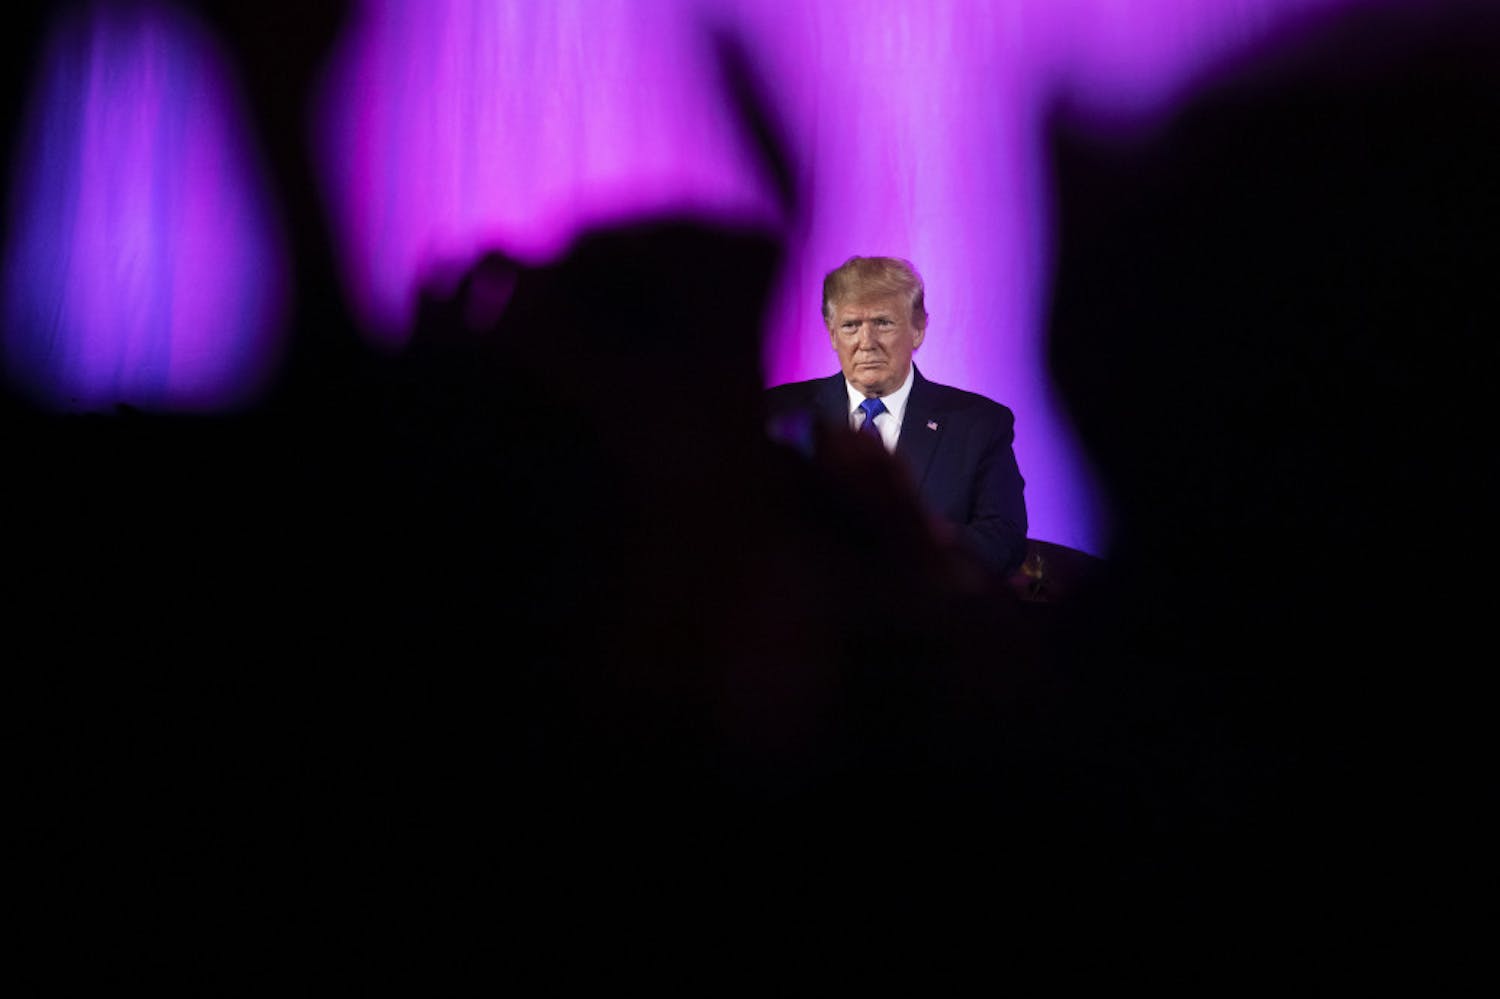 The crowd applaud as President Donald Trump concludes his speech at the Values Voter Summit in Washington, Saturday, Oct. 12, 2019. (AP Photo/Manuel Balce Ceneta)